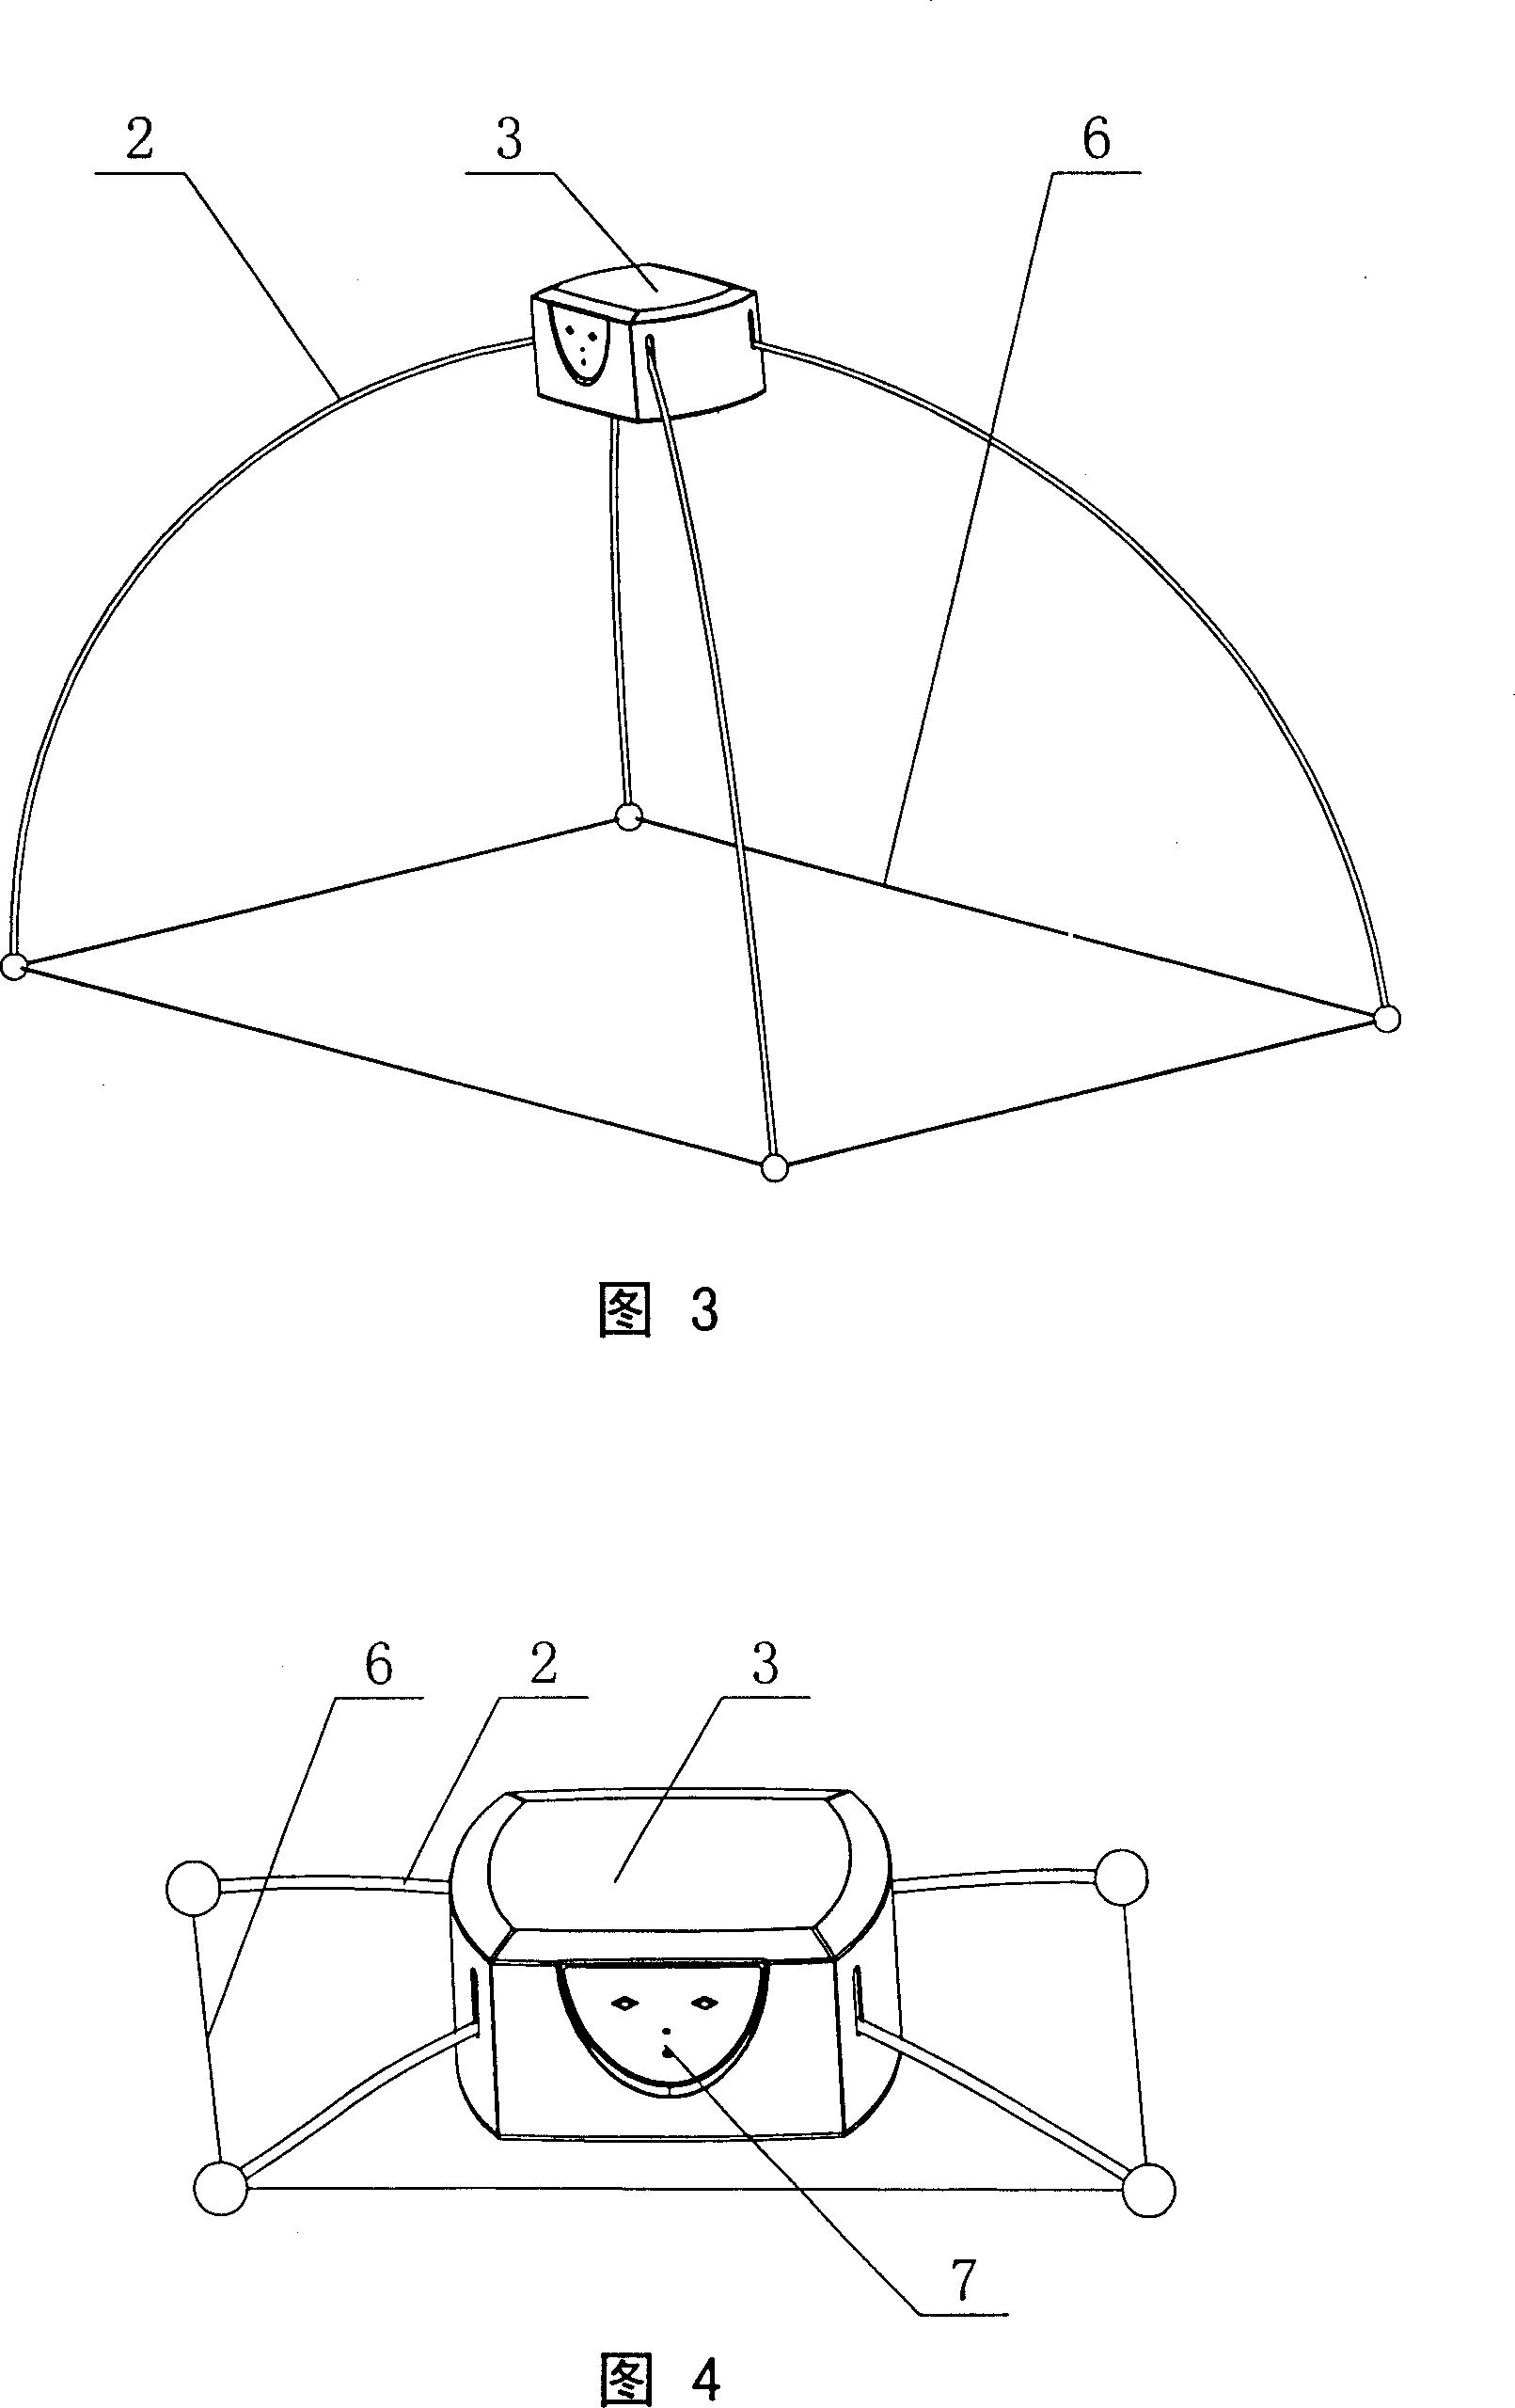 Automatic extensible tent